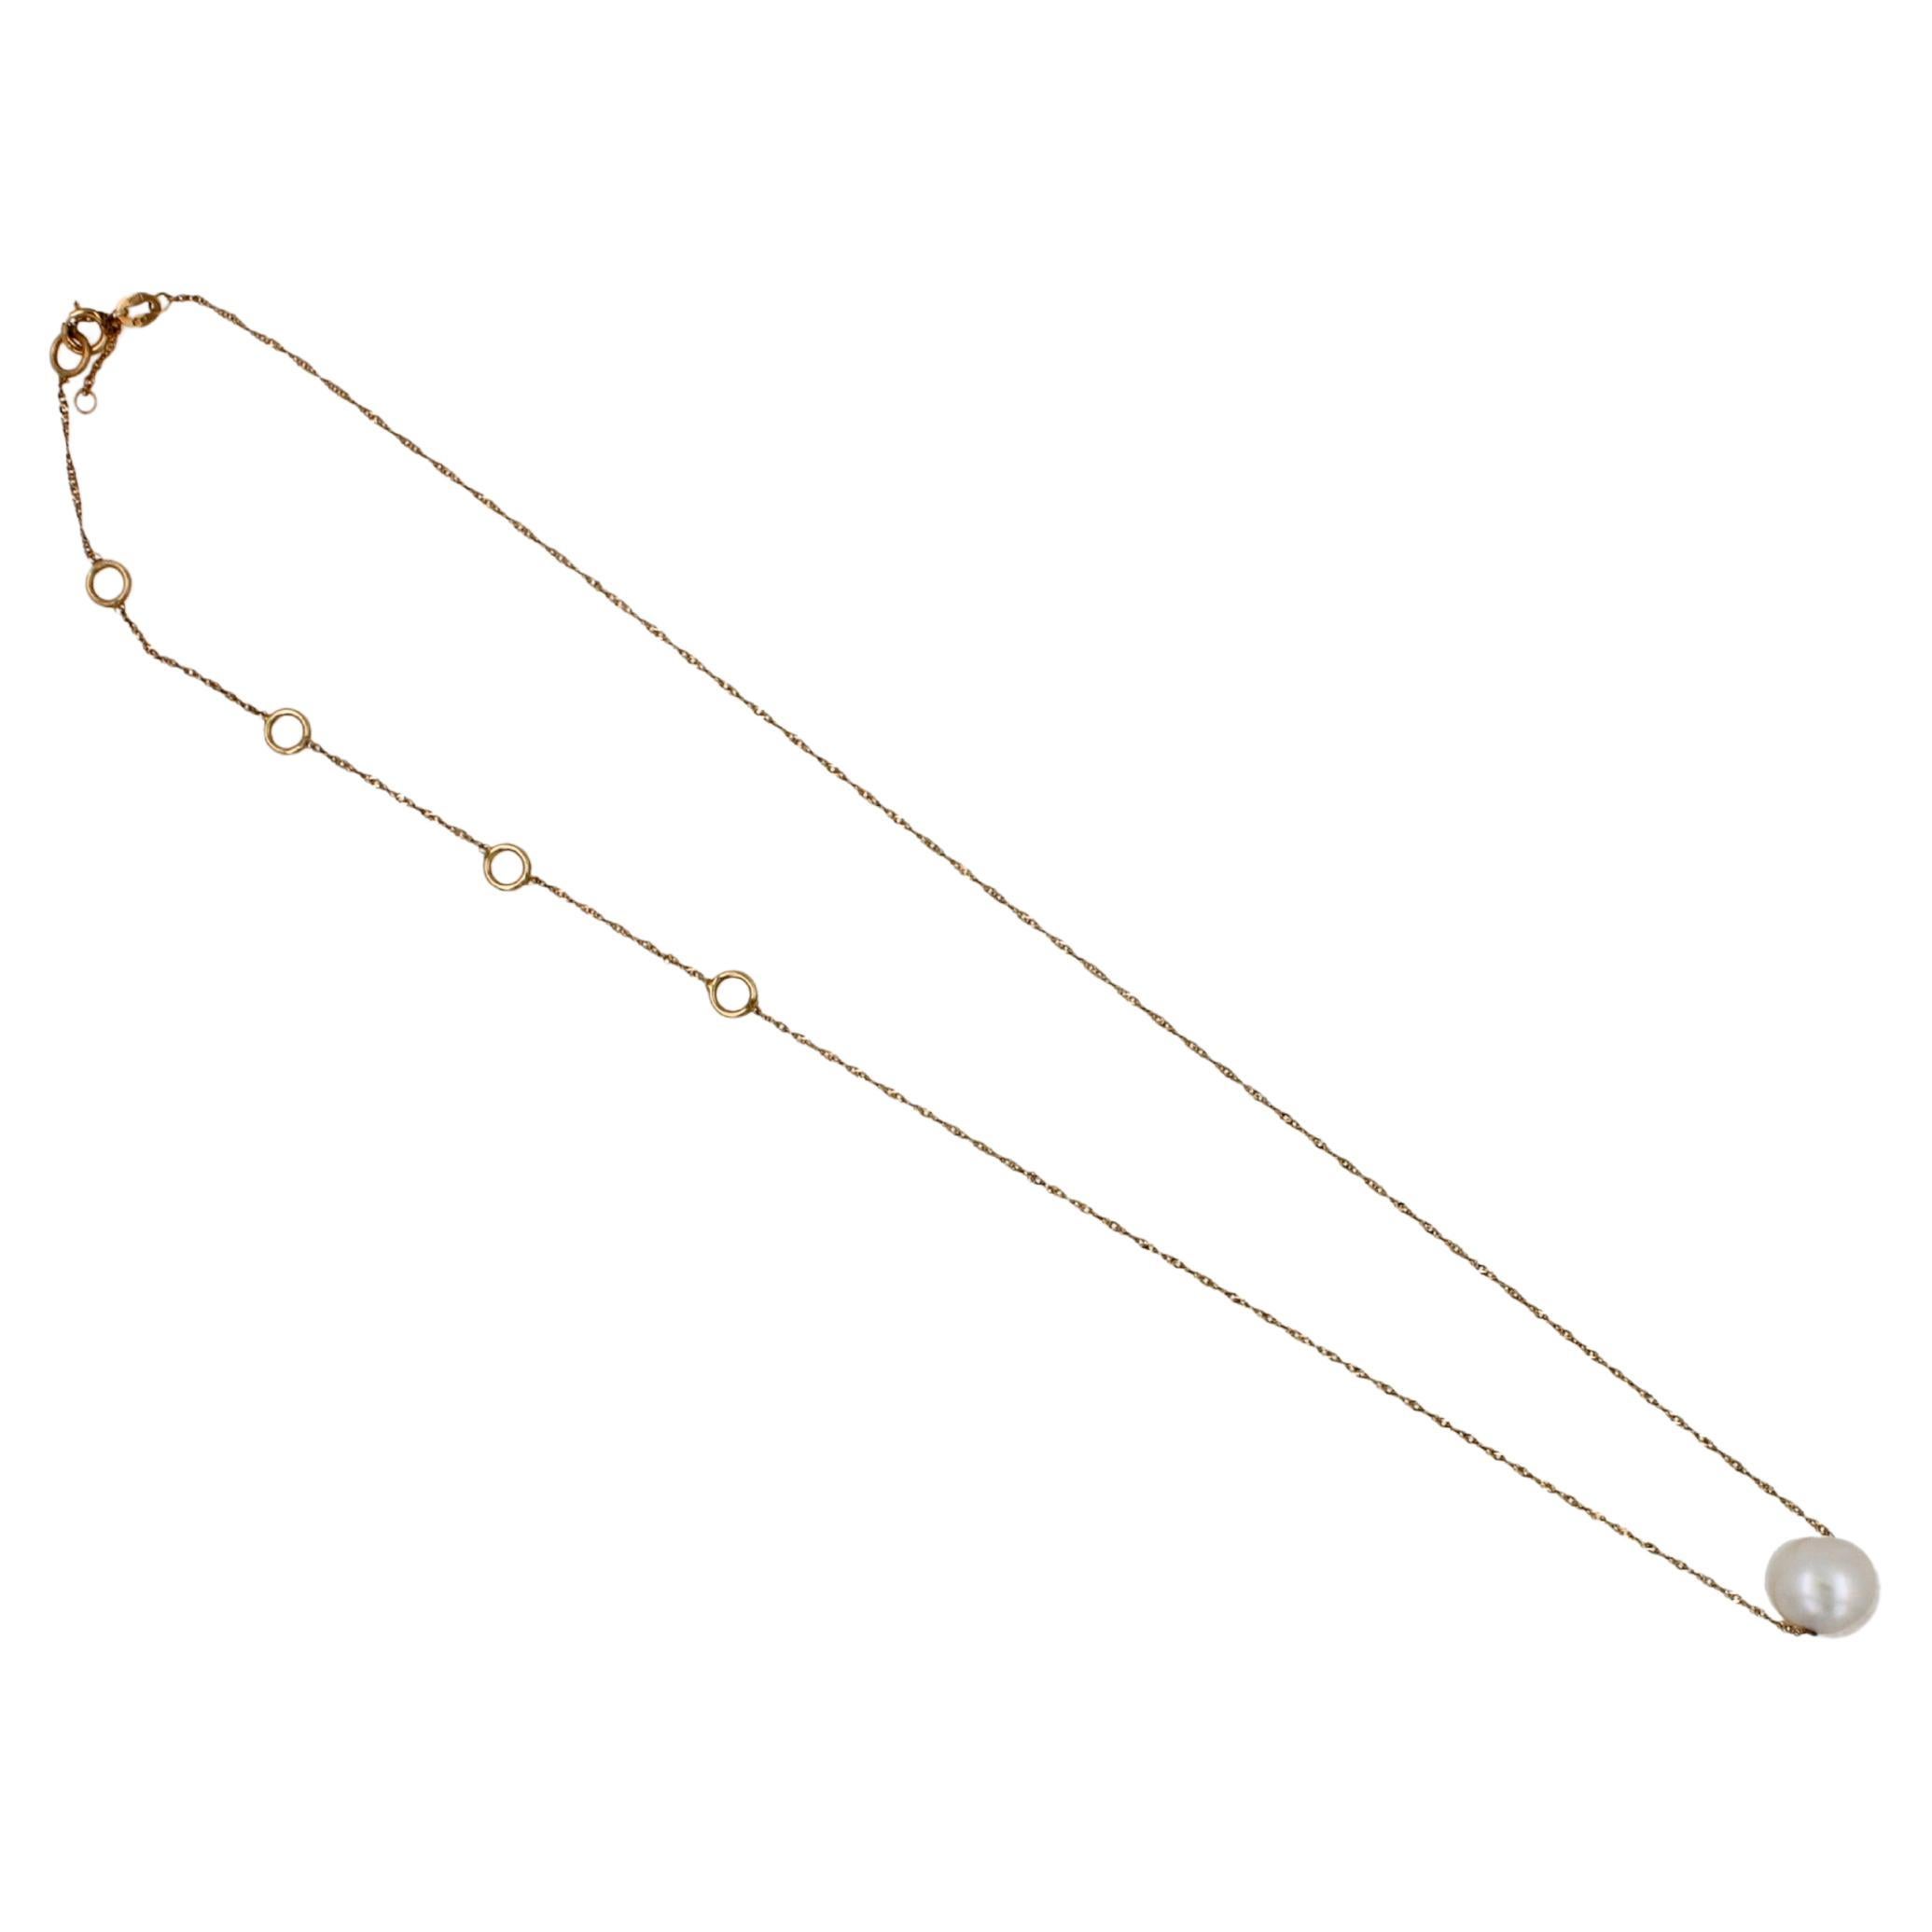 White Pearl 
14 Karat Yellow Gold
Adjustable Length High-Finish Chain
High Quality Pearl with Beautiful Shine, Luster, Size & Brilliance
Classic, Minimalistic Design 